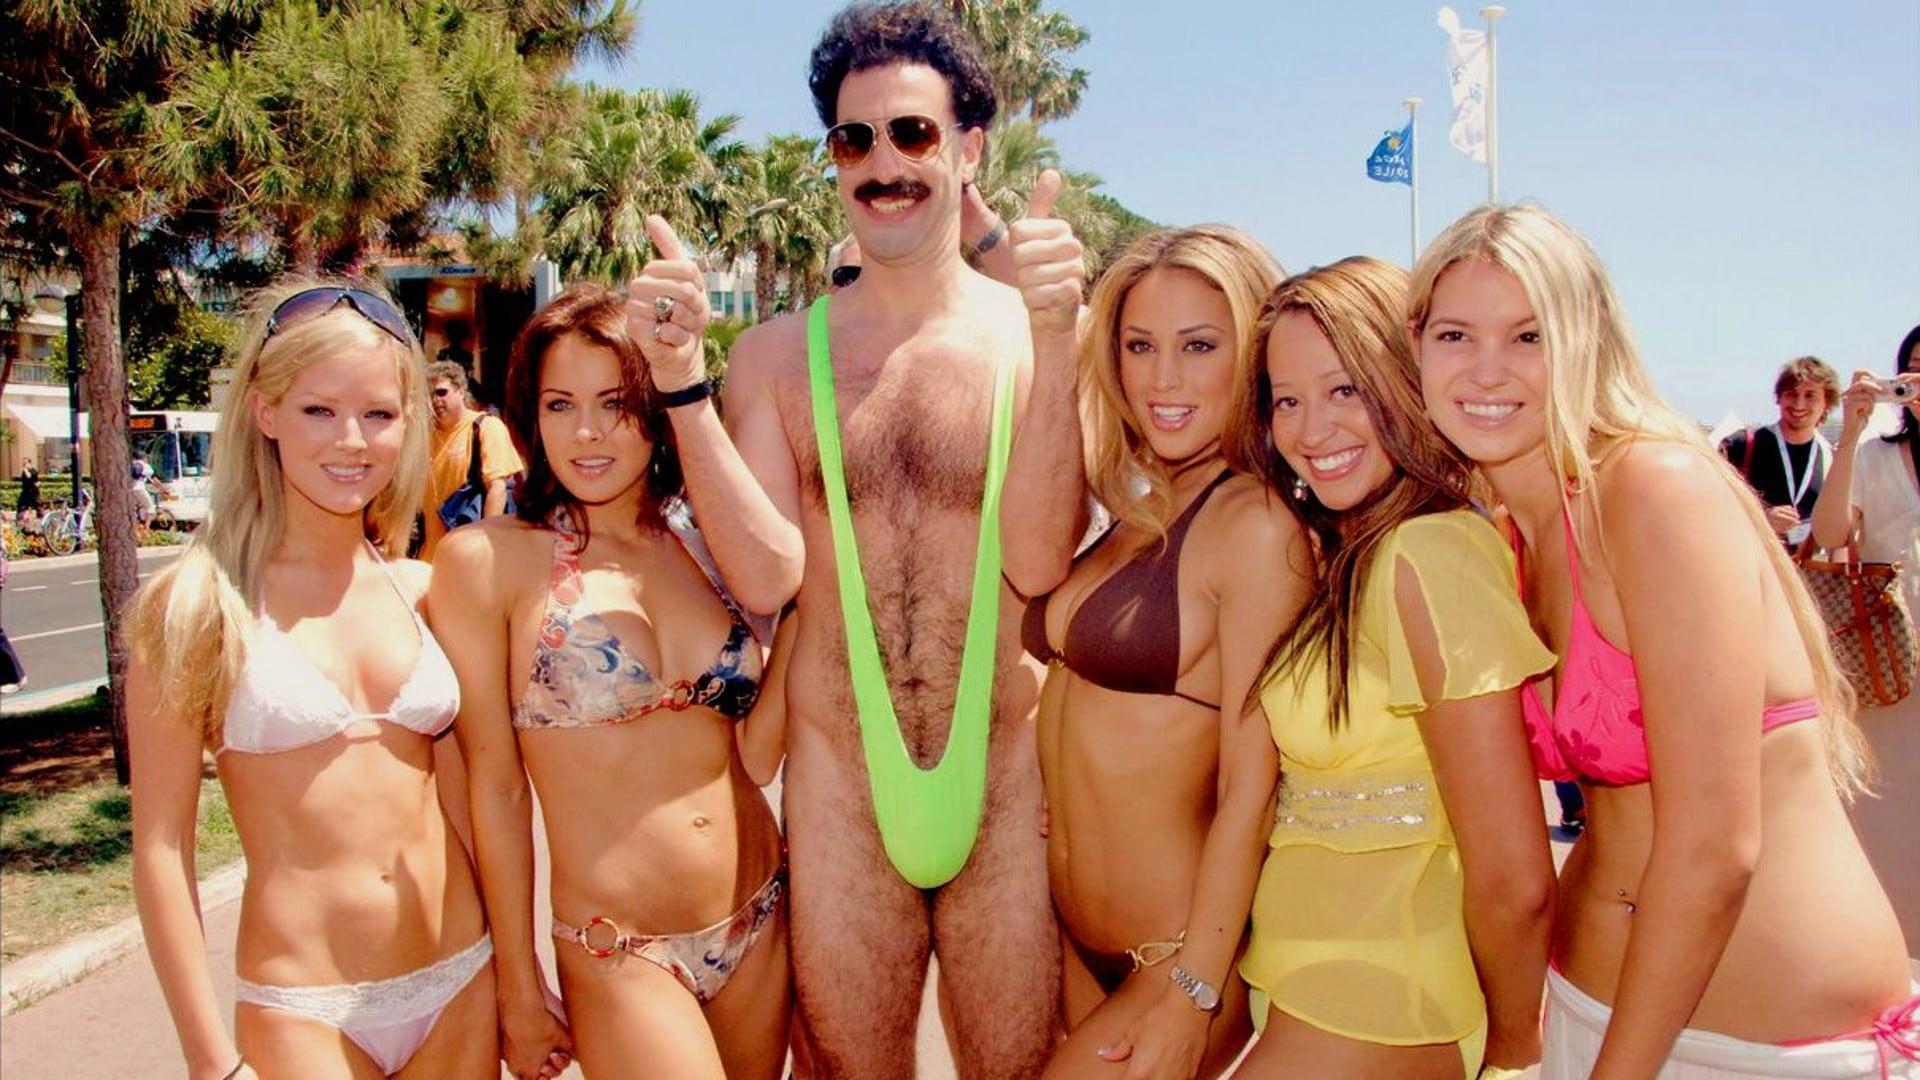 Promotion still from Borat: Cultural Learnings of America for Make Benefit Glorious Nation of Kazakhstan